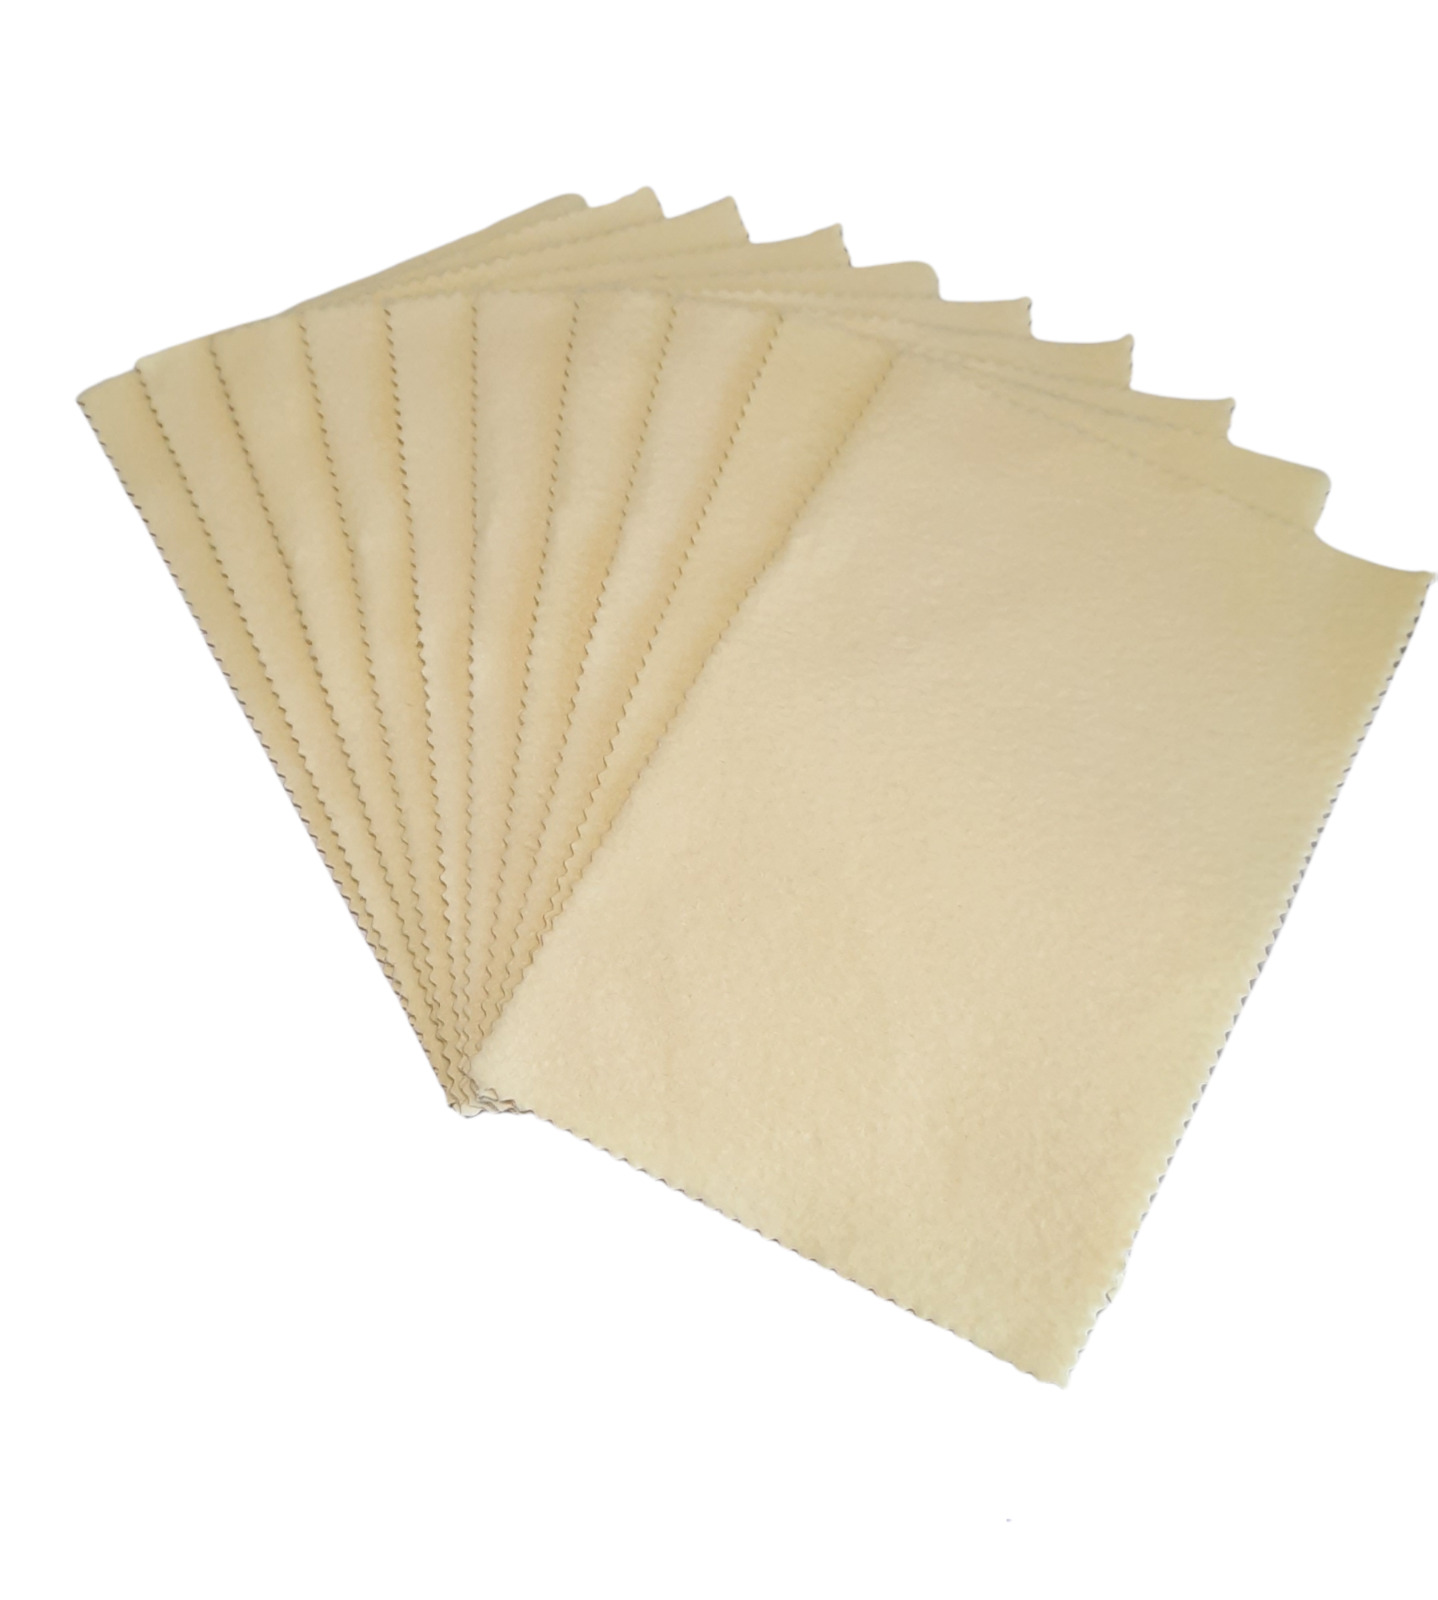 Set of 10 Sunshine Polishing Cloths Non-Scratch Jewelry Cleaner Tarnish Remover